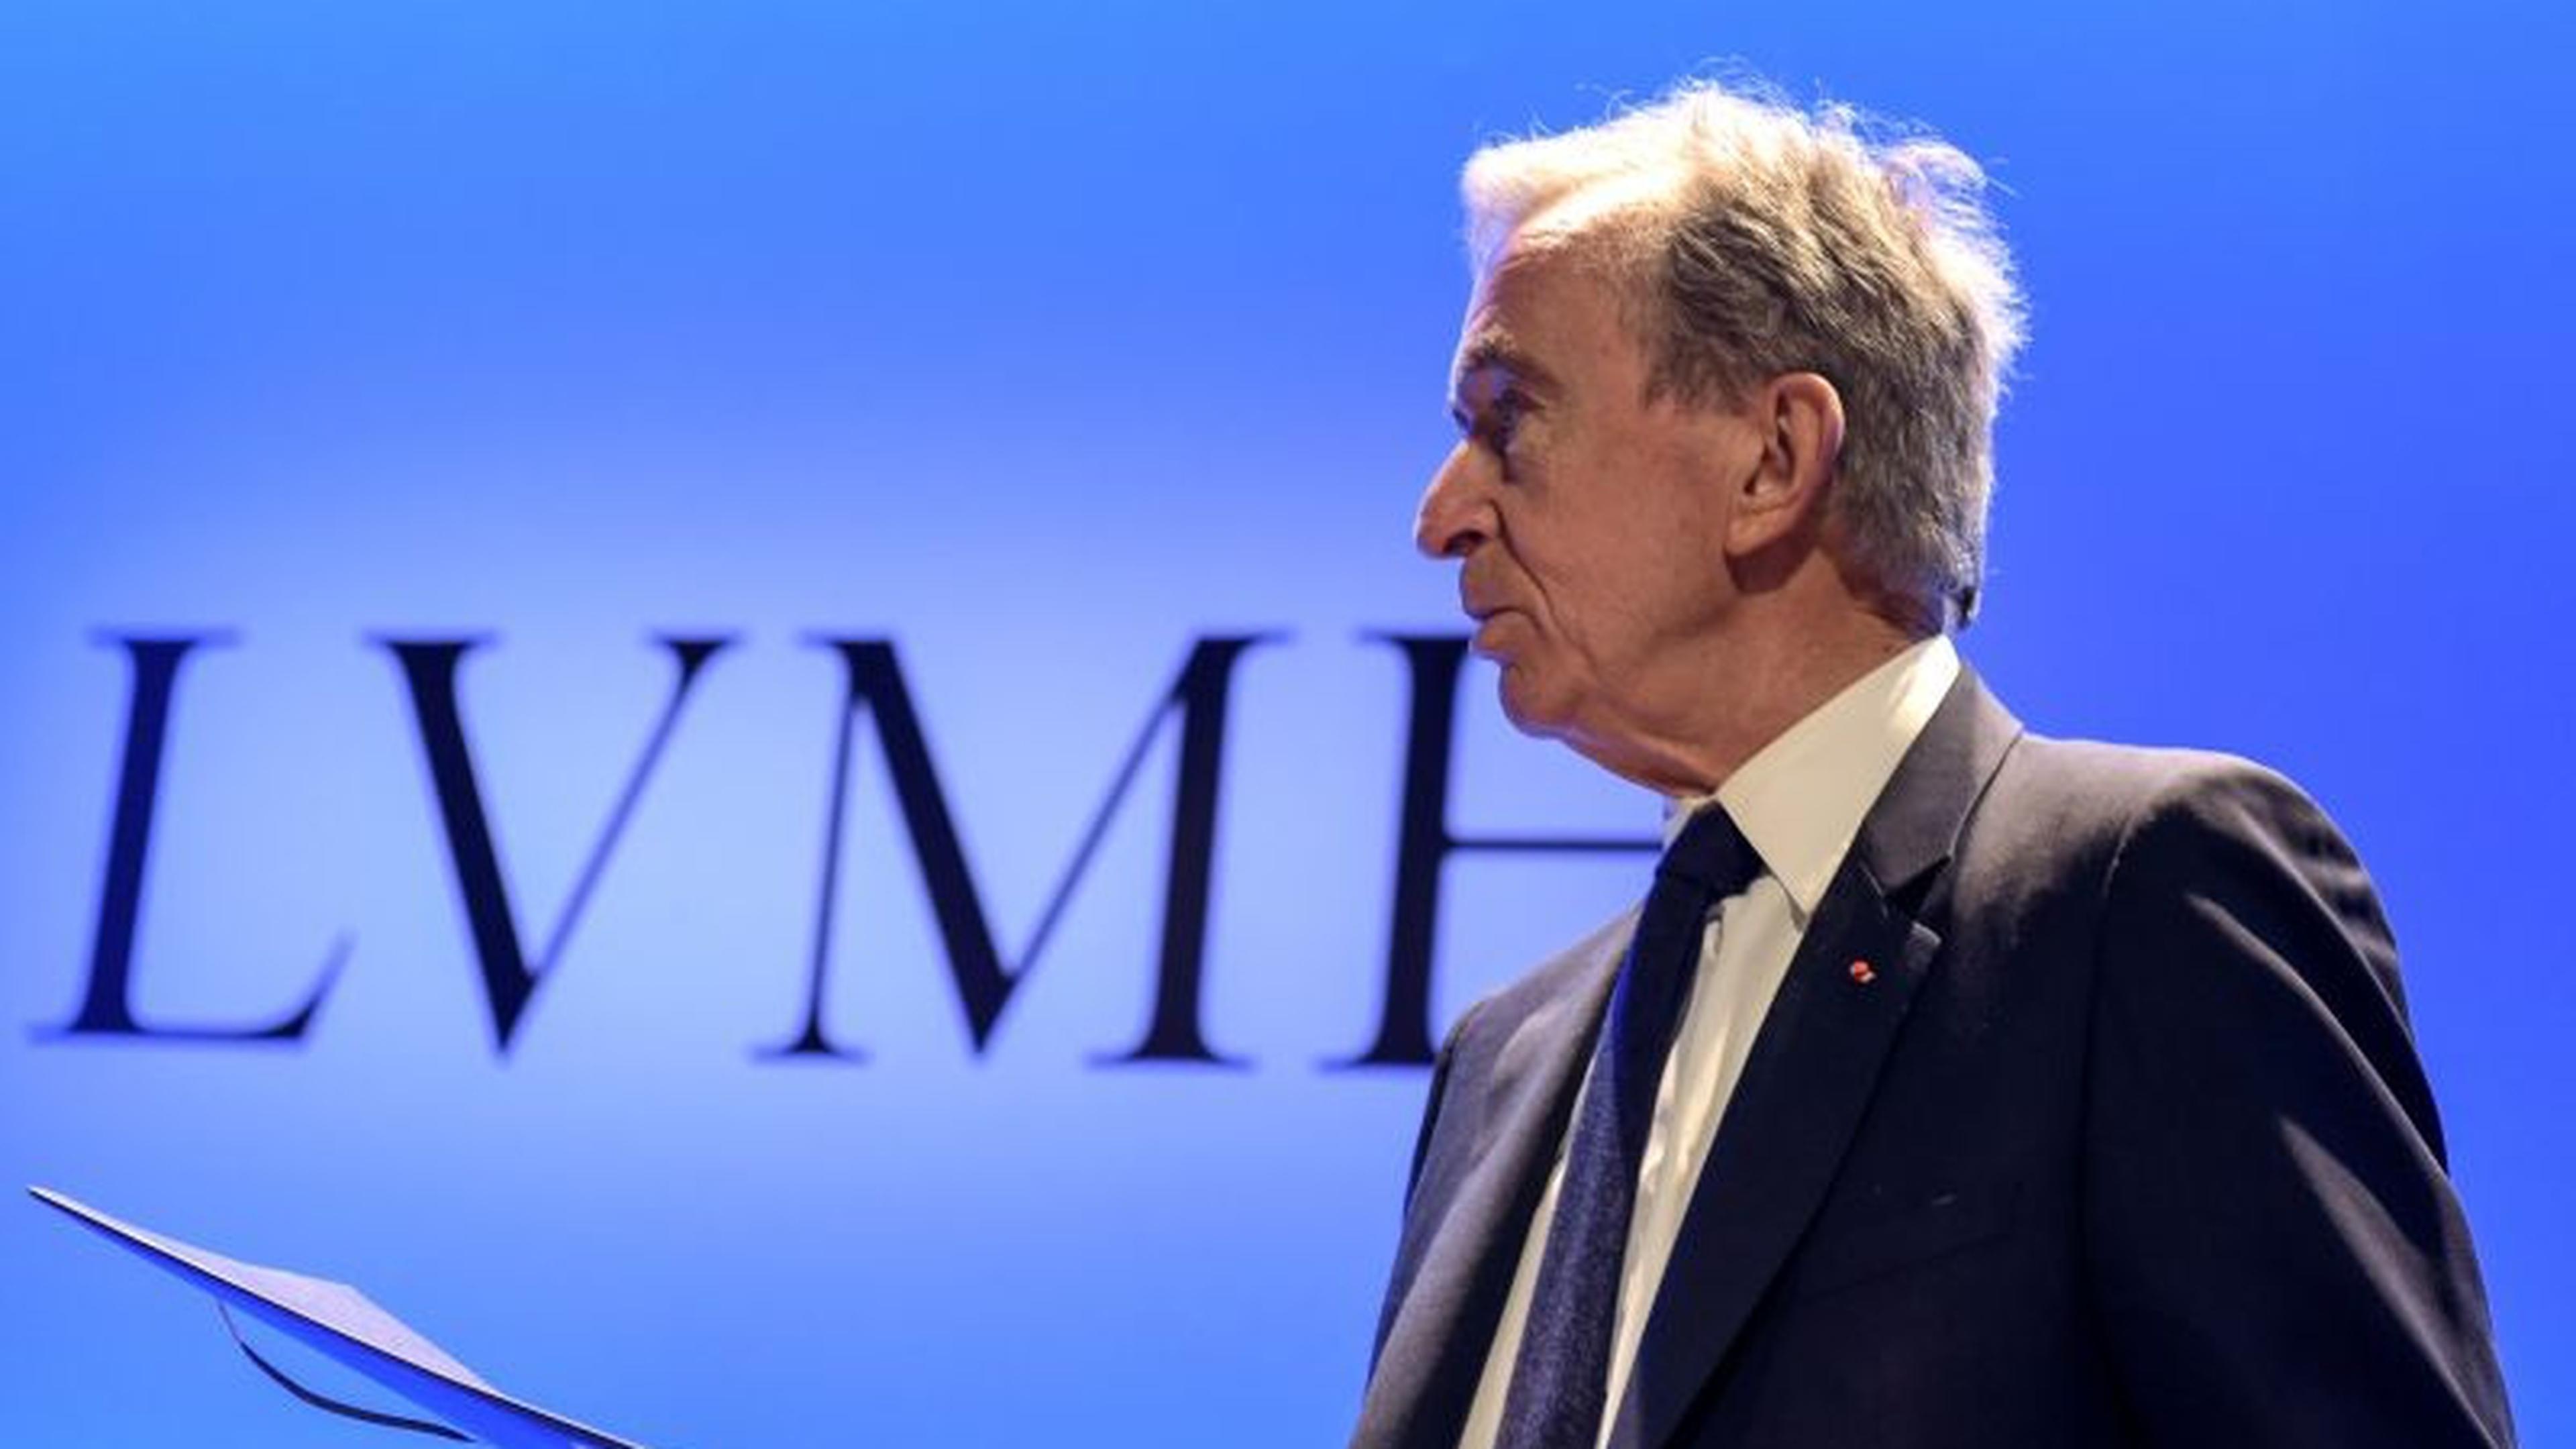 Deal targeted by probe involving LVMH's Arnault was legal, lawyer